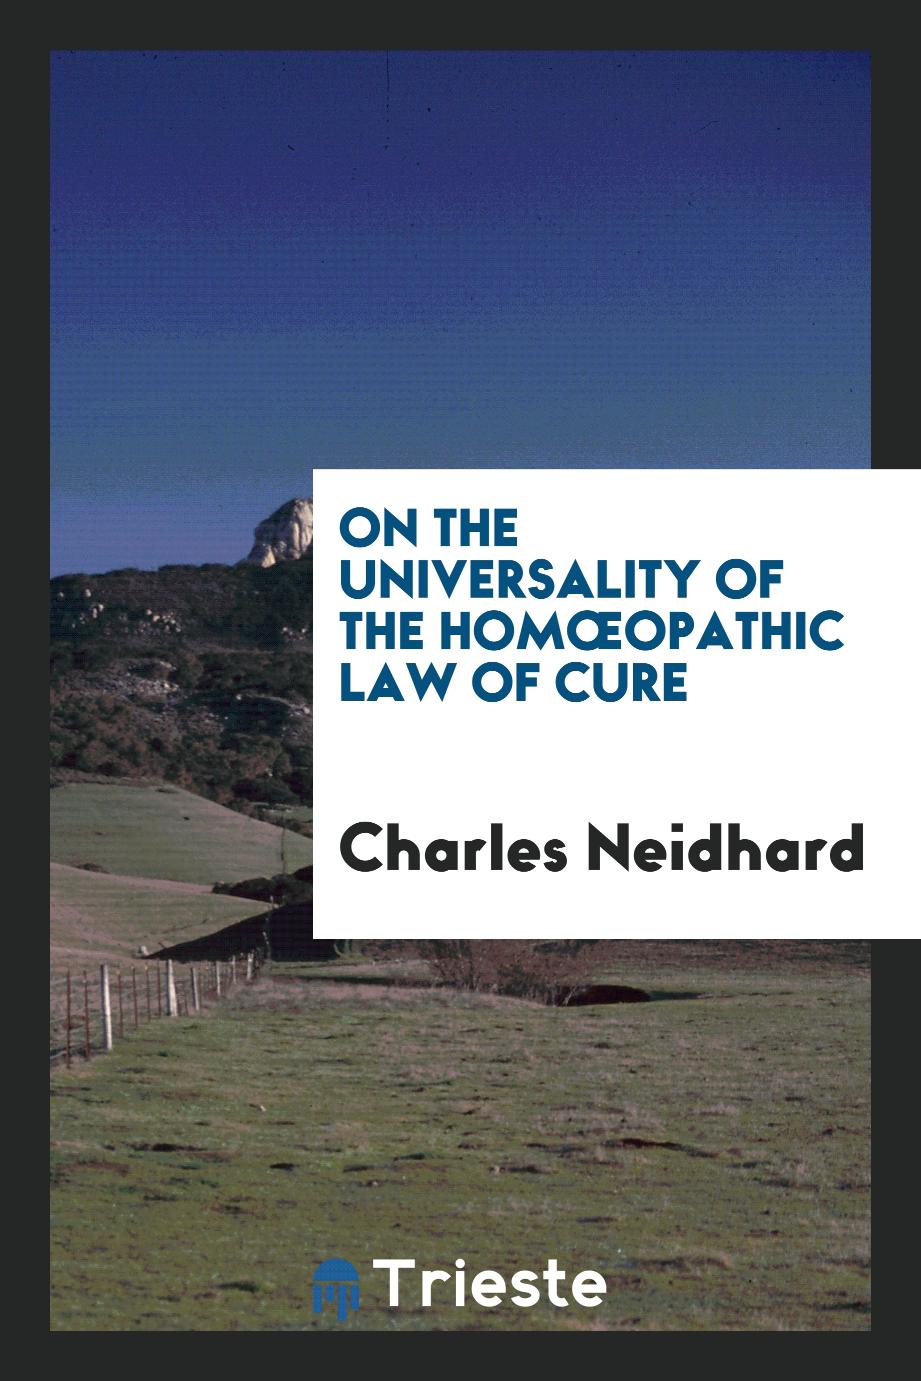 On the universality of the homœopathic law of cure